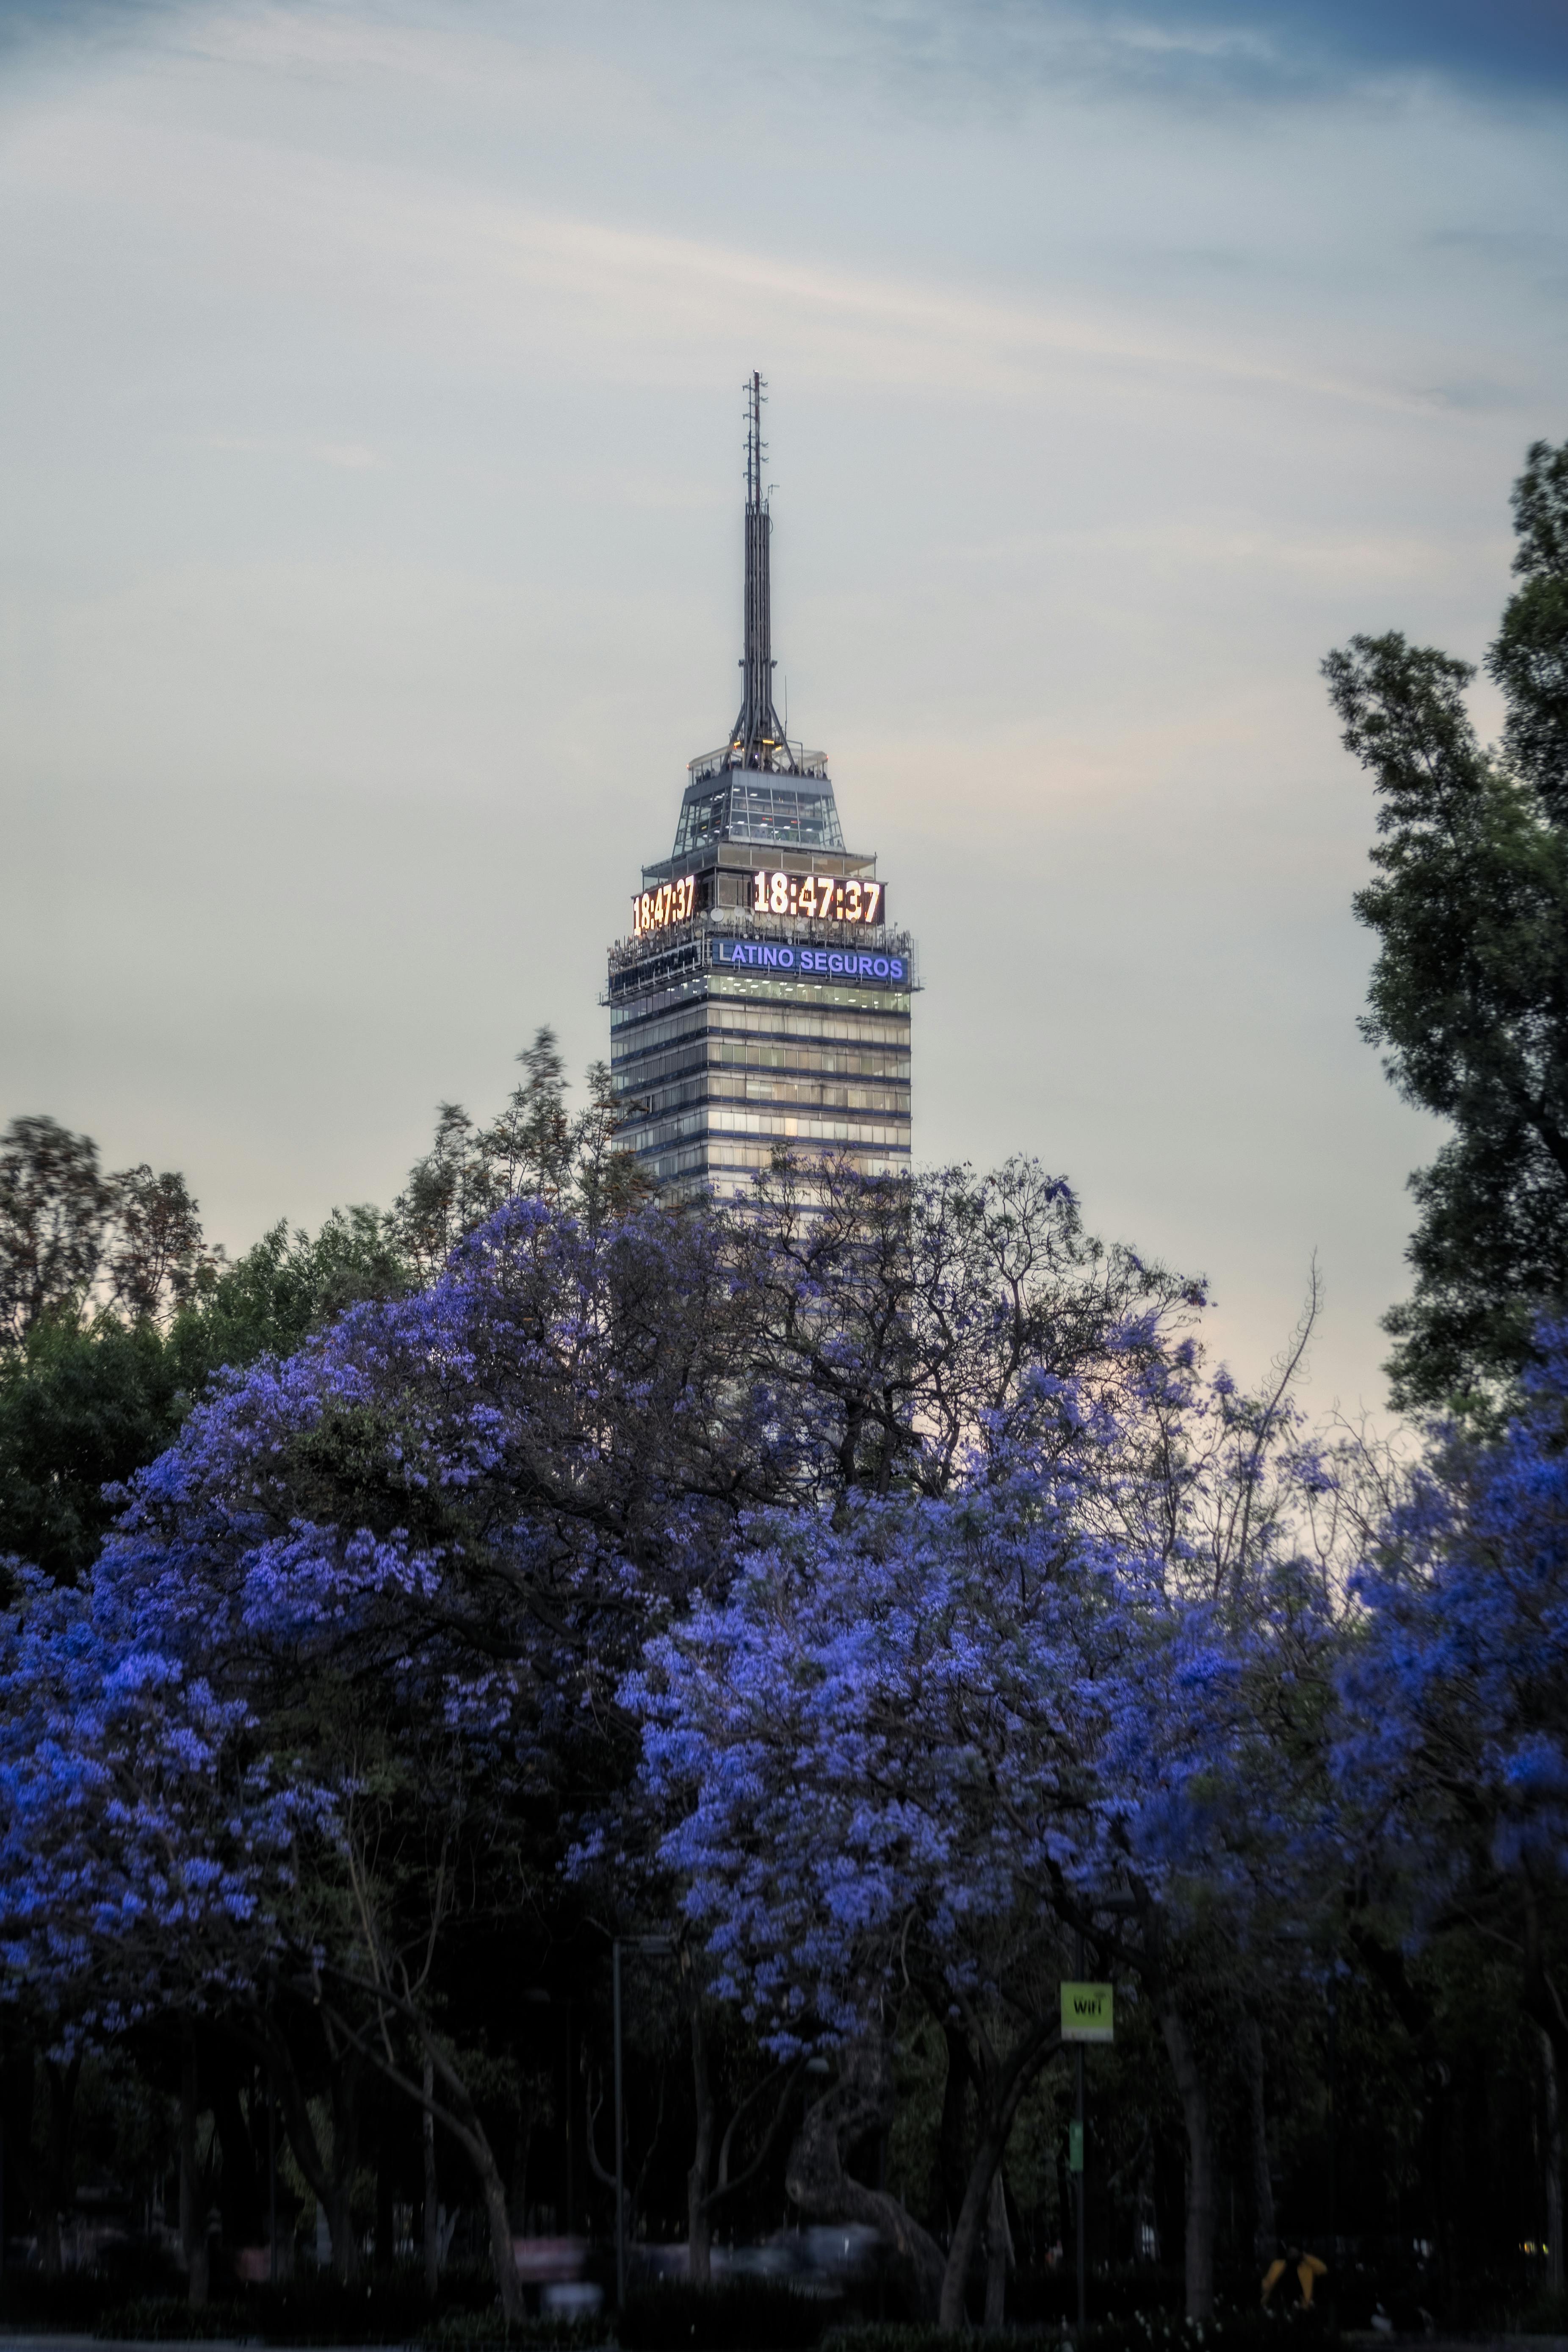 torre latinoamericana behind trees in spring in mexico city